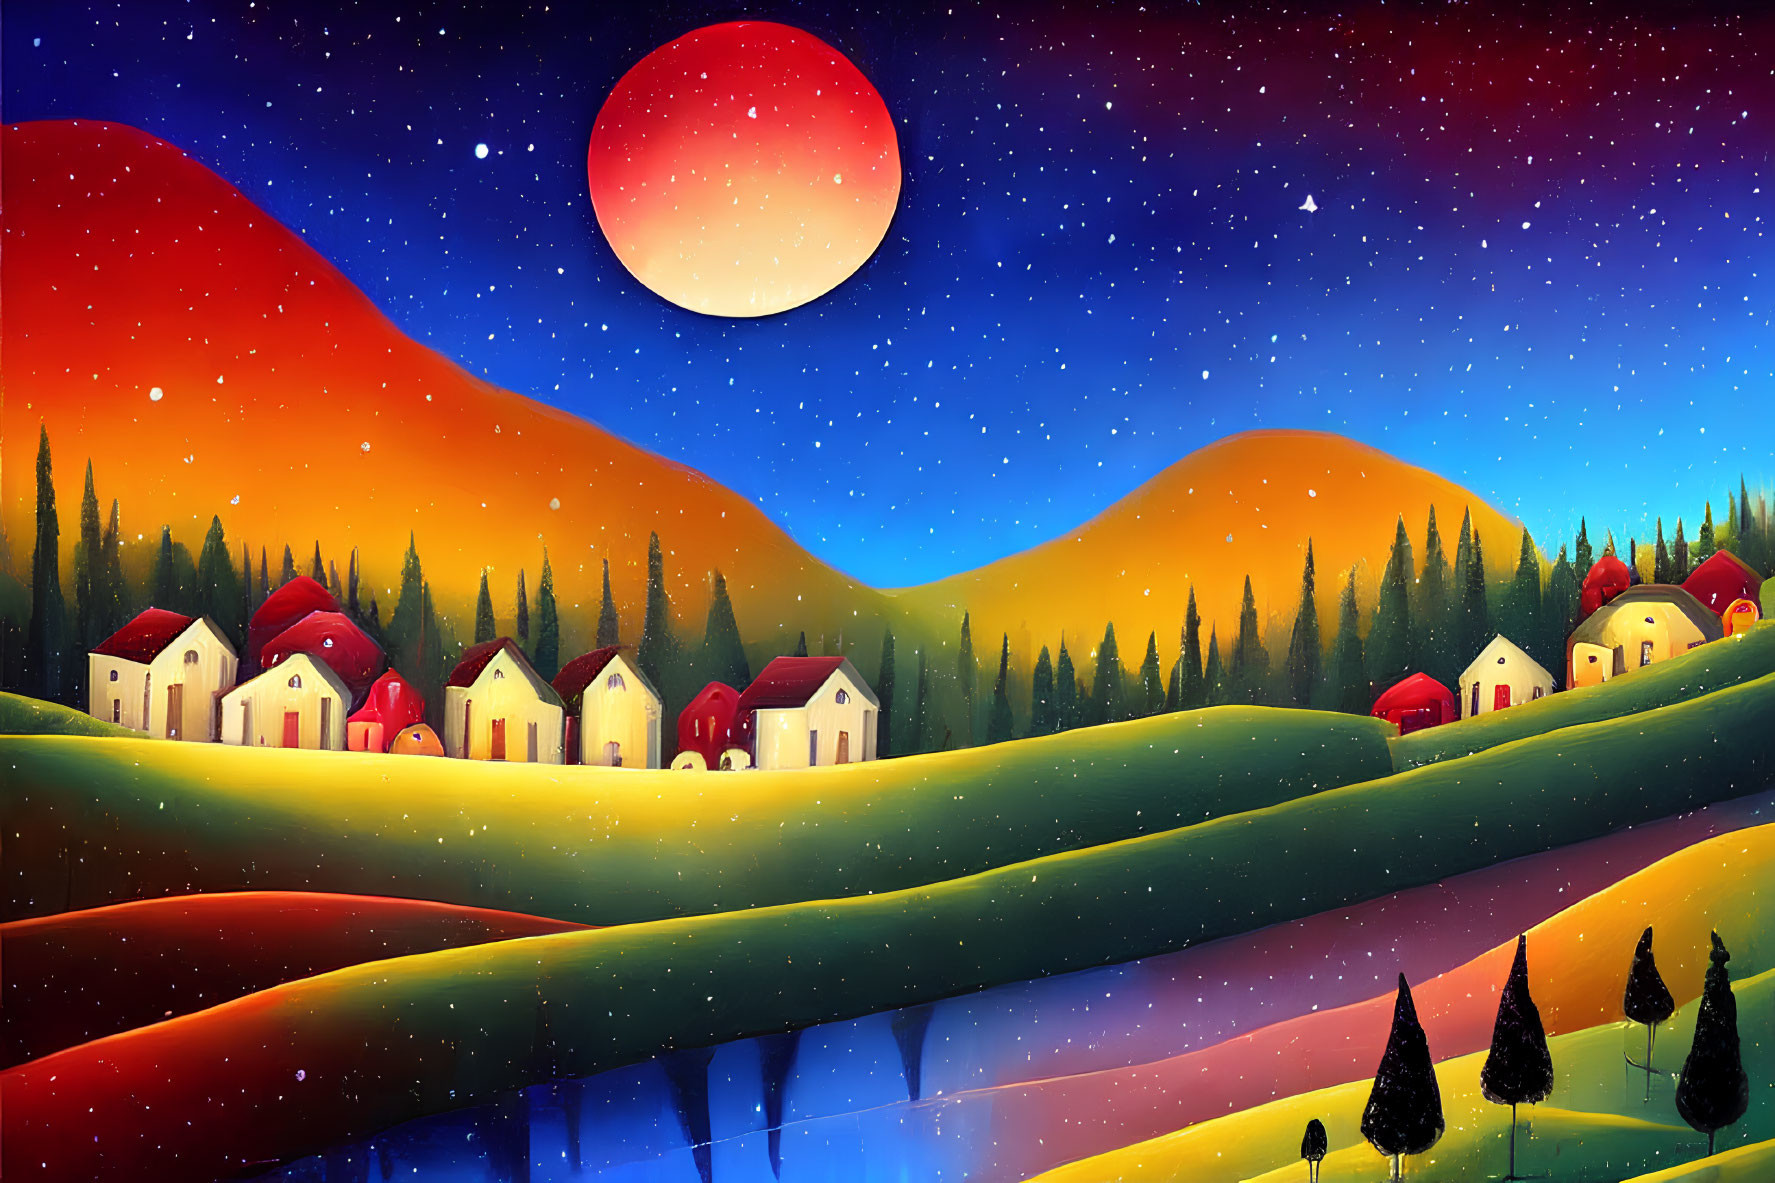 Colorful houses and moon in surreal landscape with stars and reflective lake